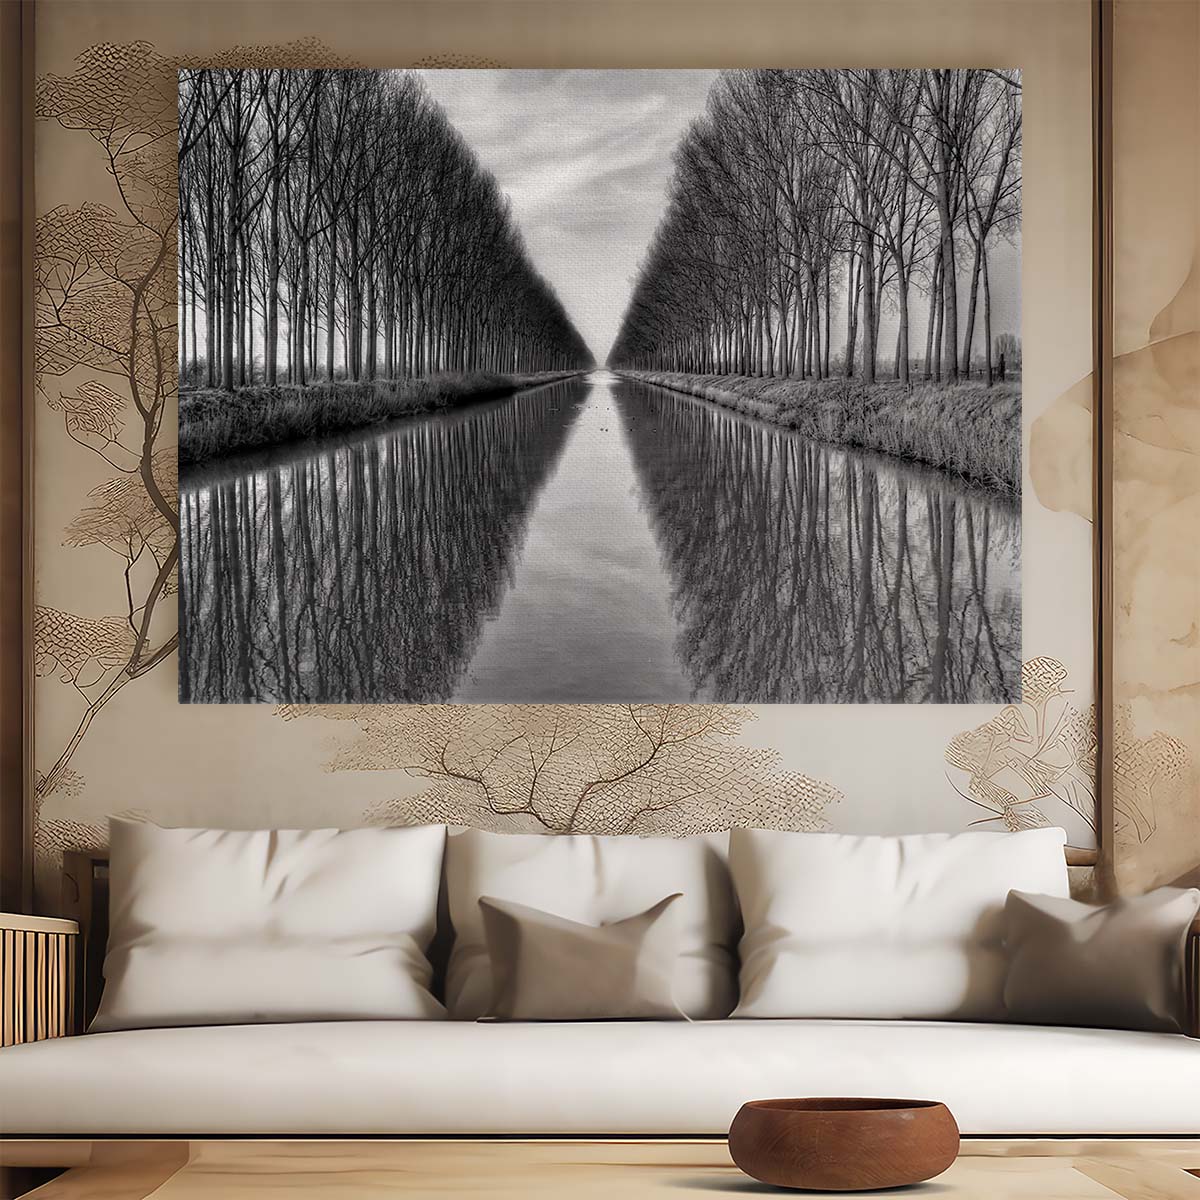 Zeebruges Canal Autumn Reflection Black and White Photography Wall Art